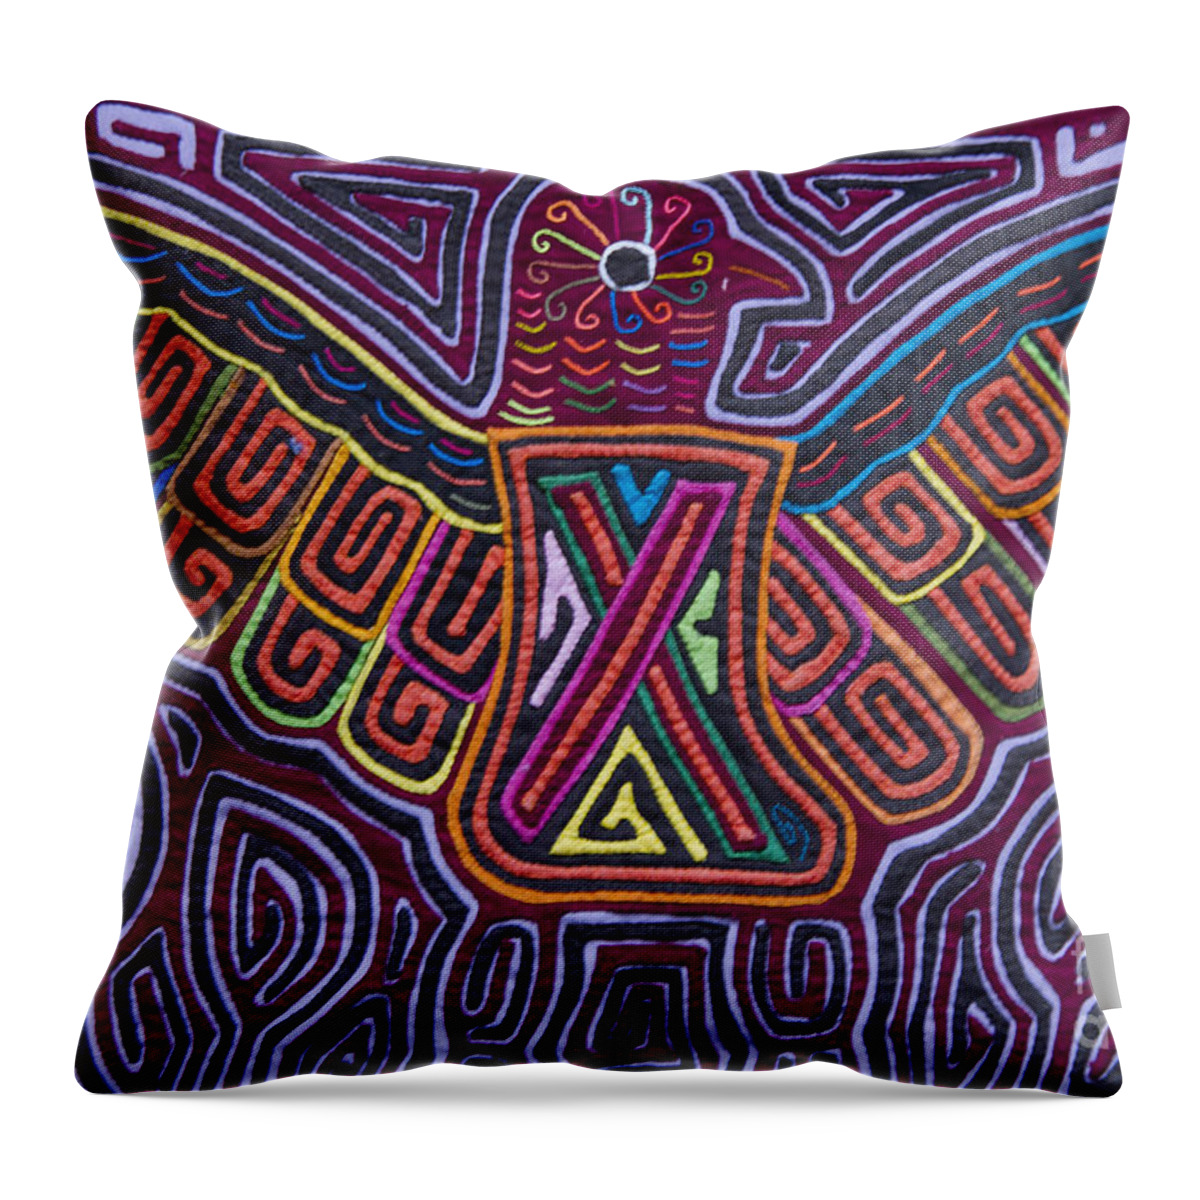 Mola Throw Pillow featuring the photograph Kuna Design - Mola by Heiko Koehrer-Wagner